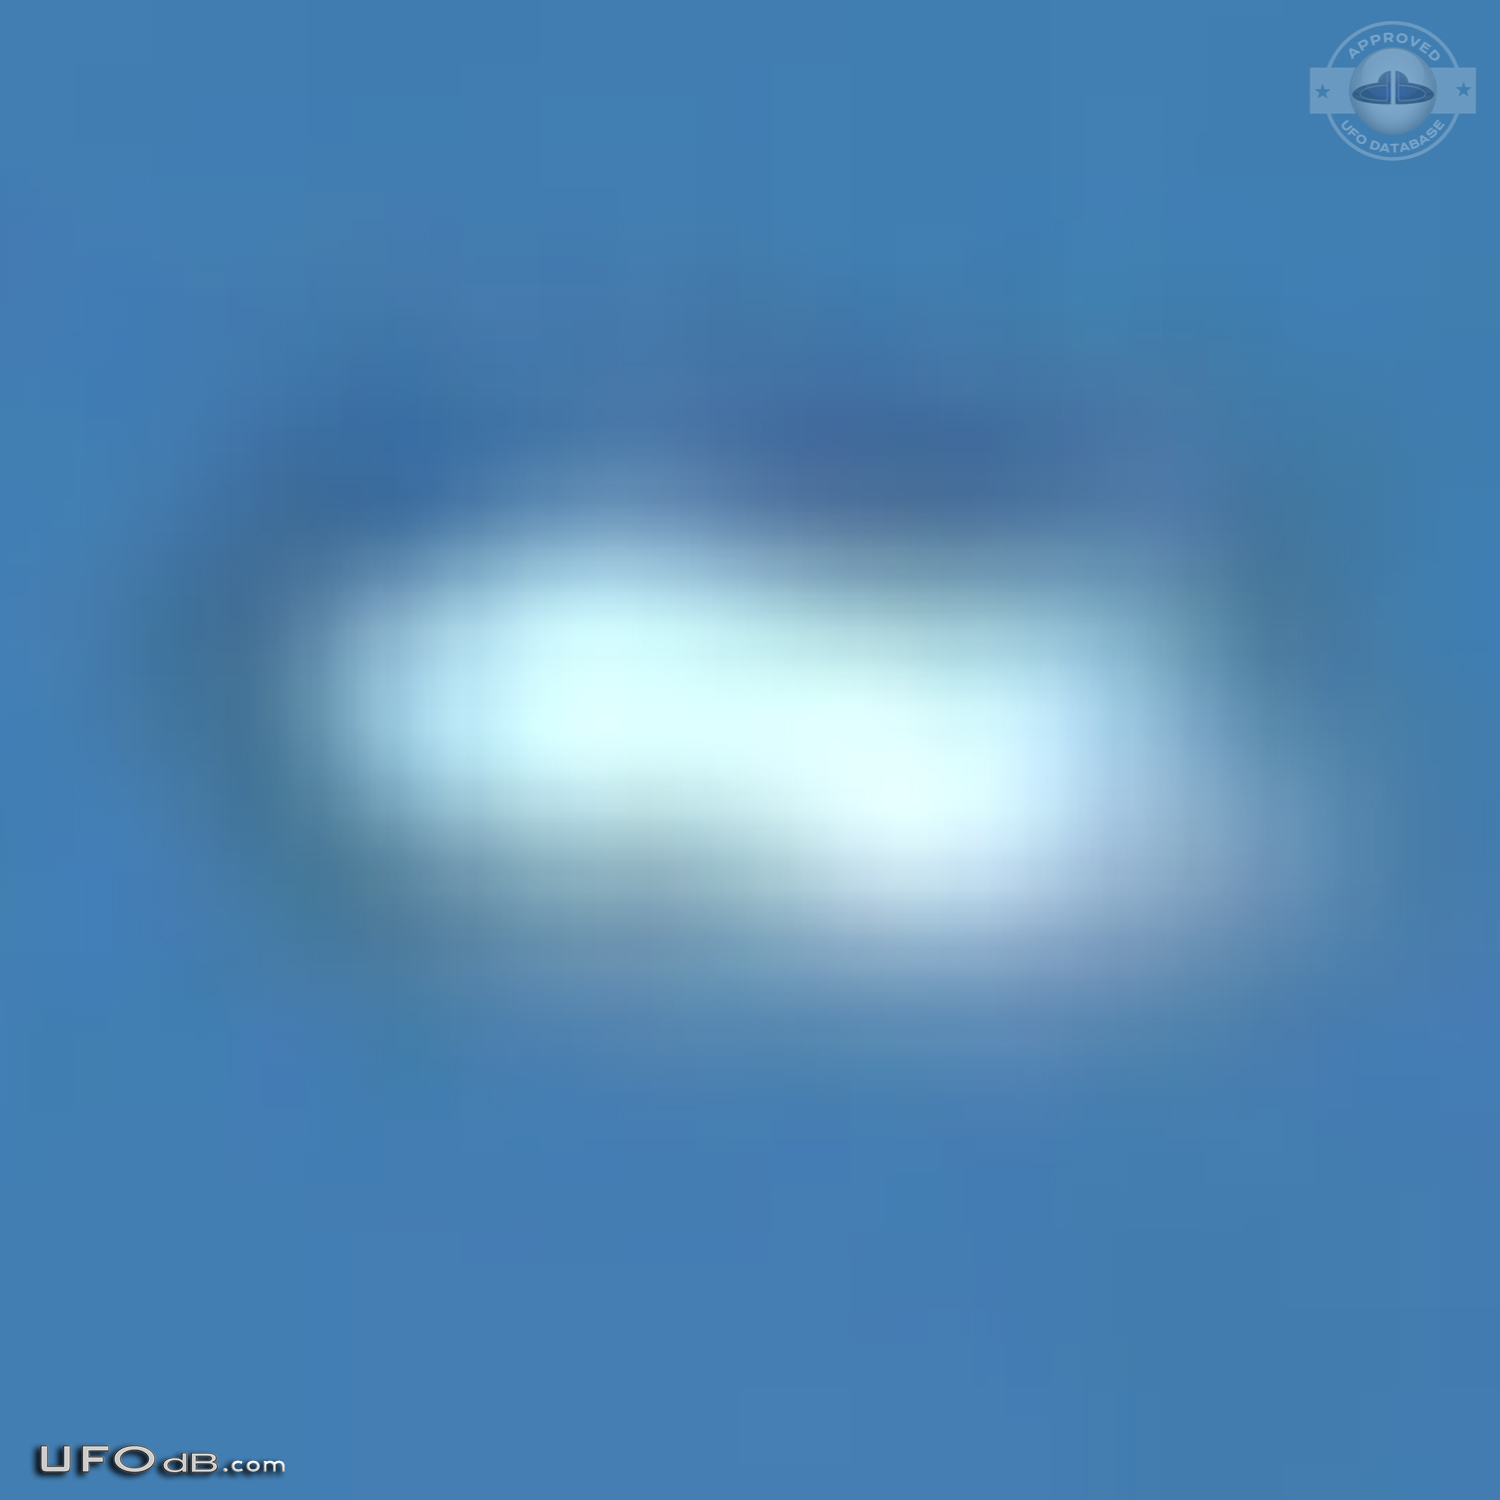 Cylindrical Saucer UFO caught on picture over Oland, Sweden in 2008 UFO Picture #453-5